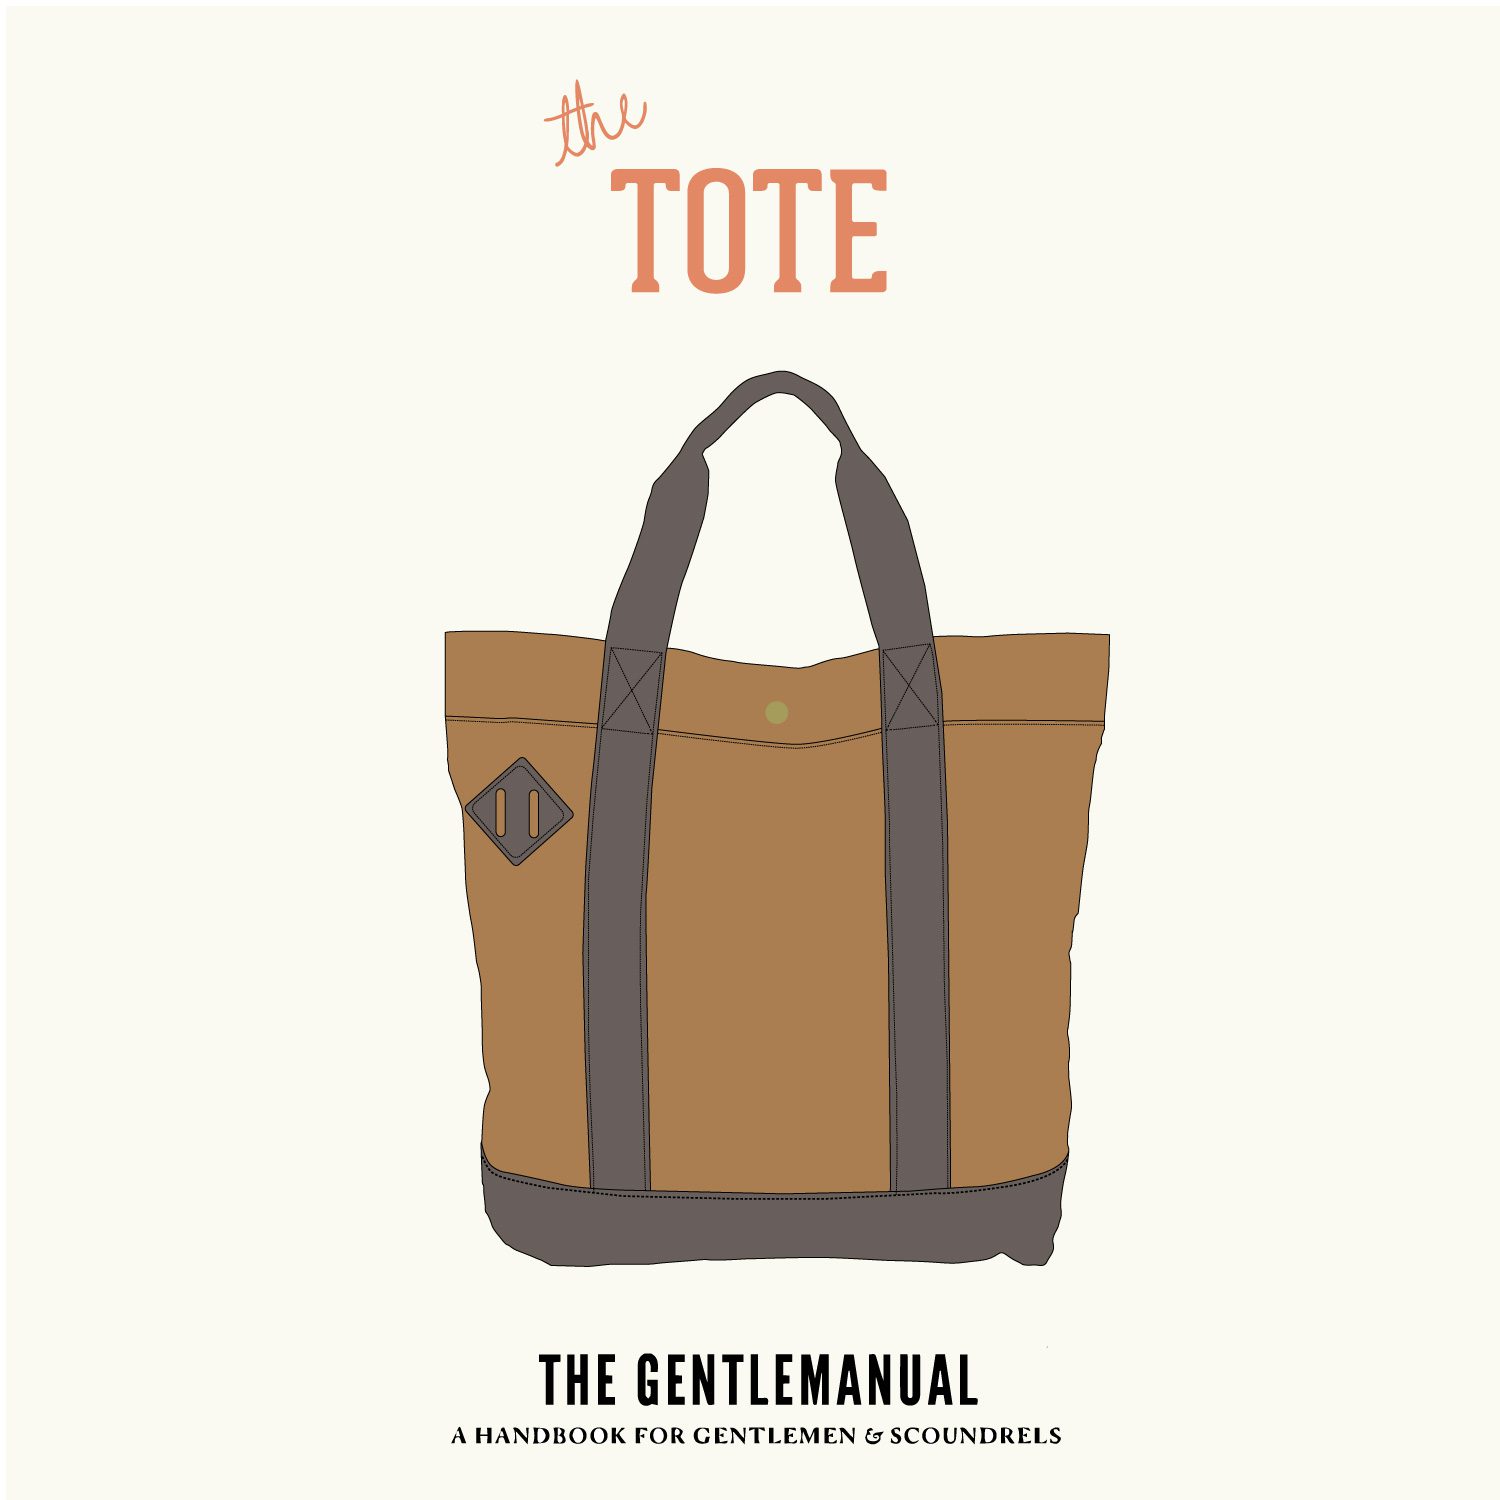 9 Types Of Bags For Men - Essential Guide - Gentleman's Trend